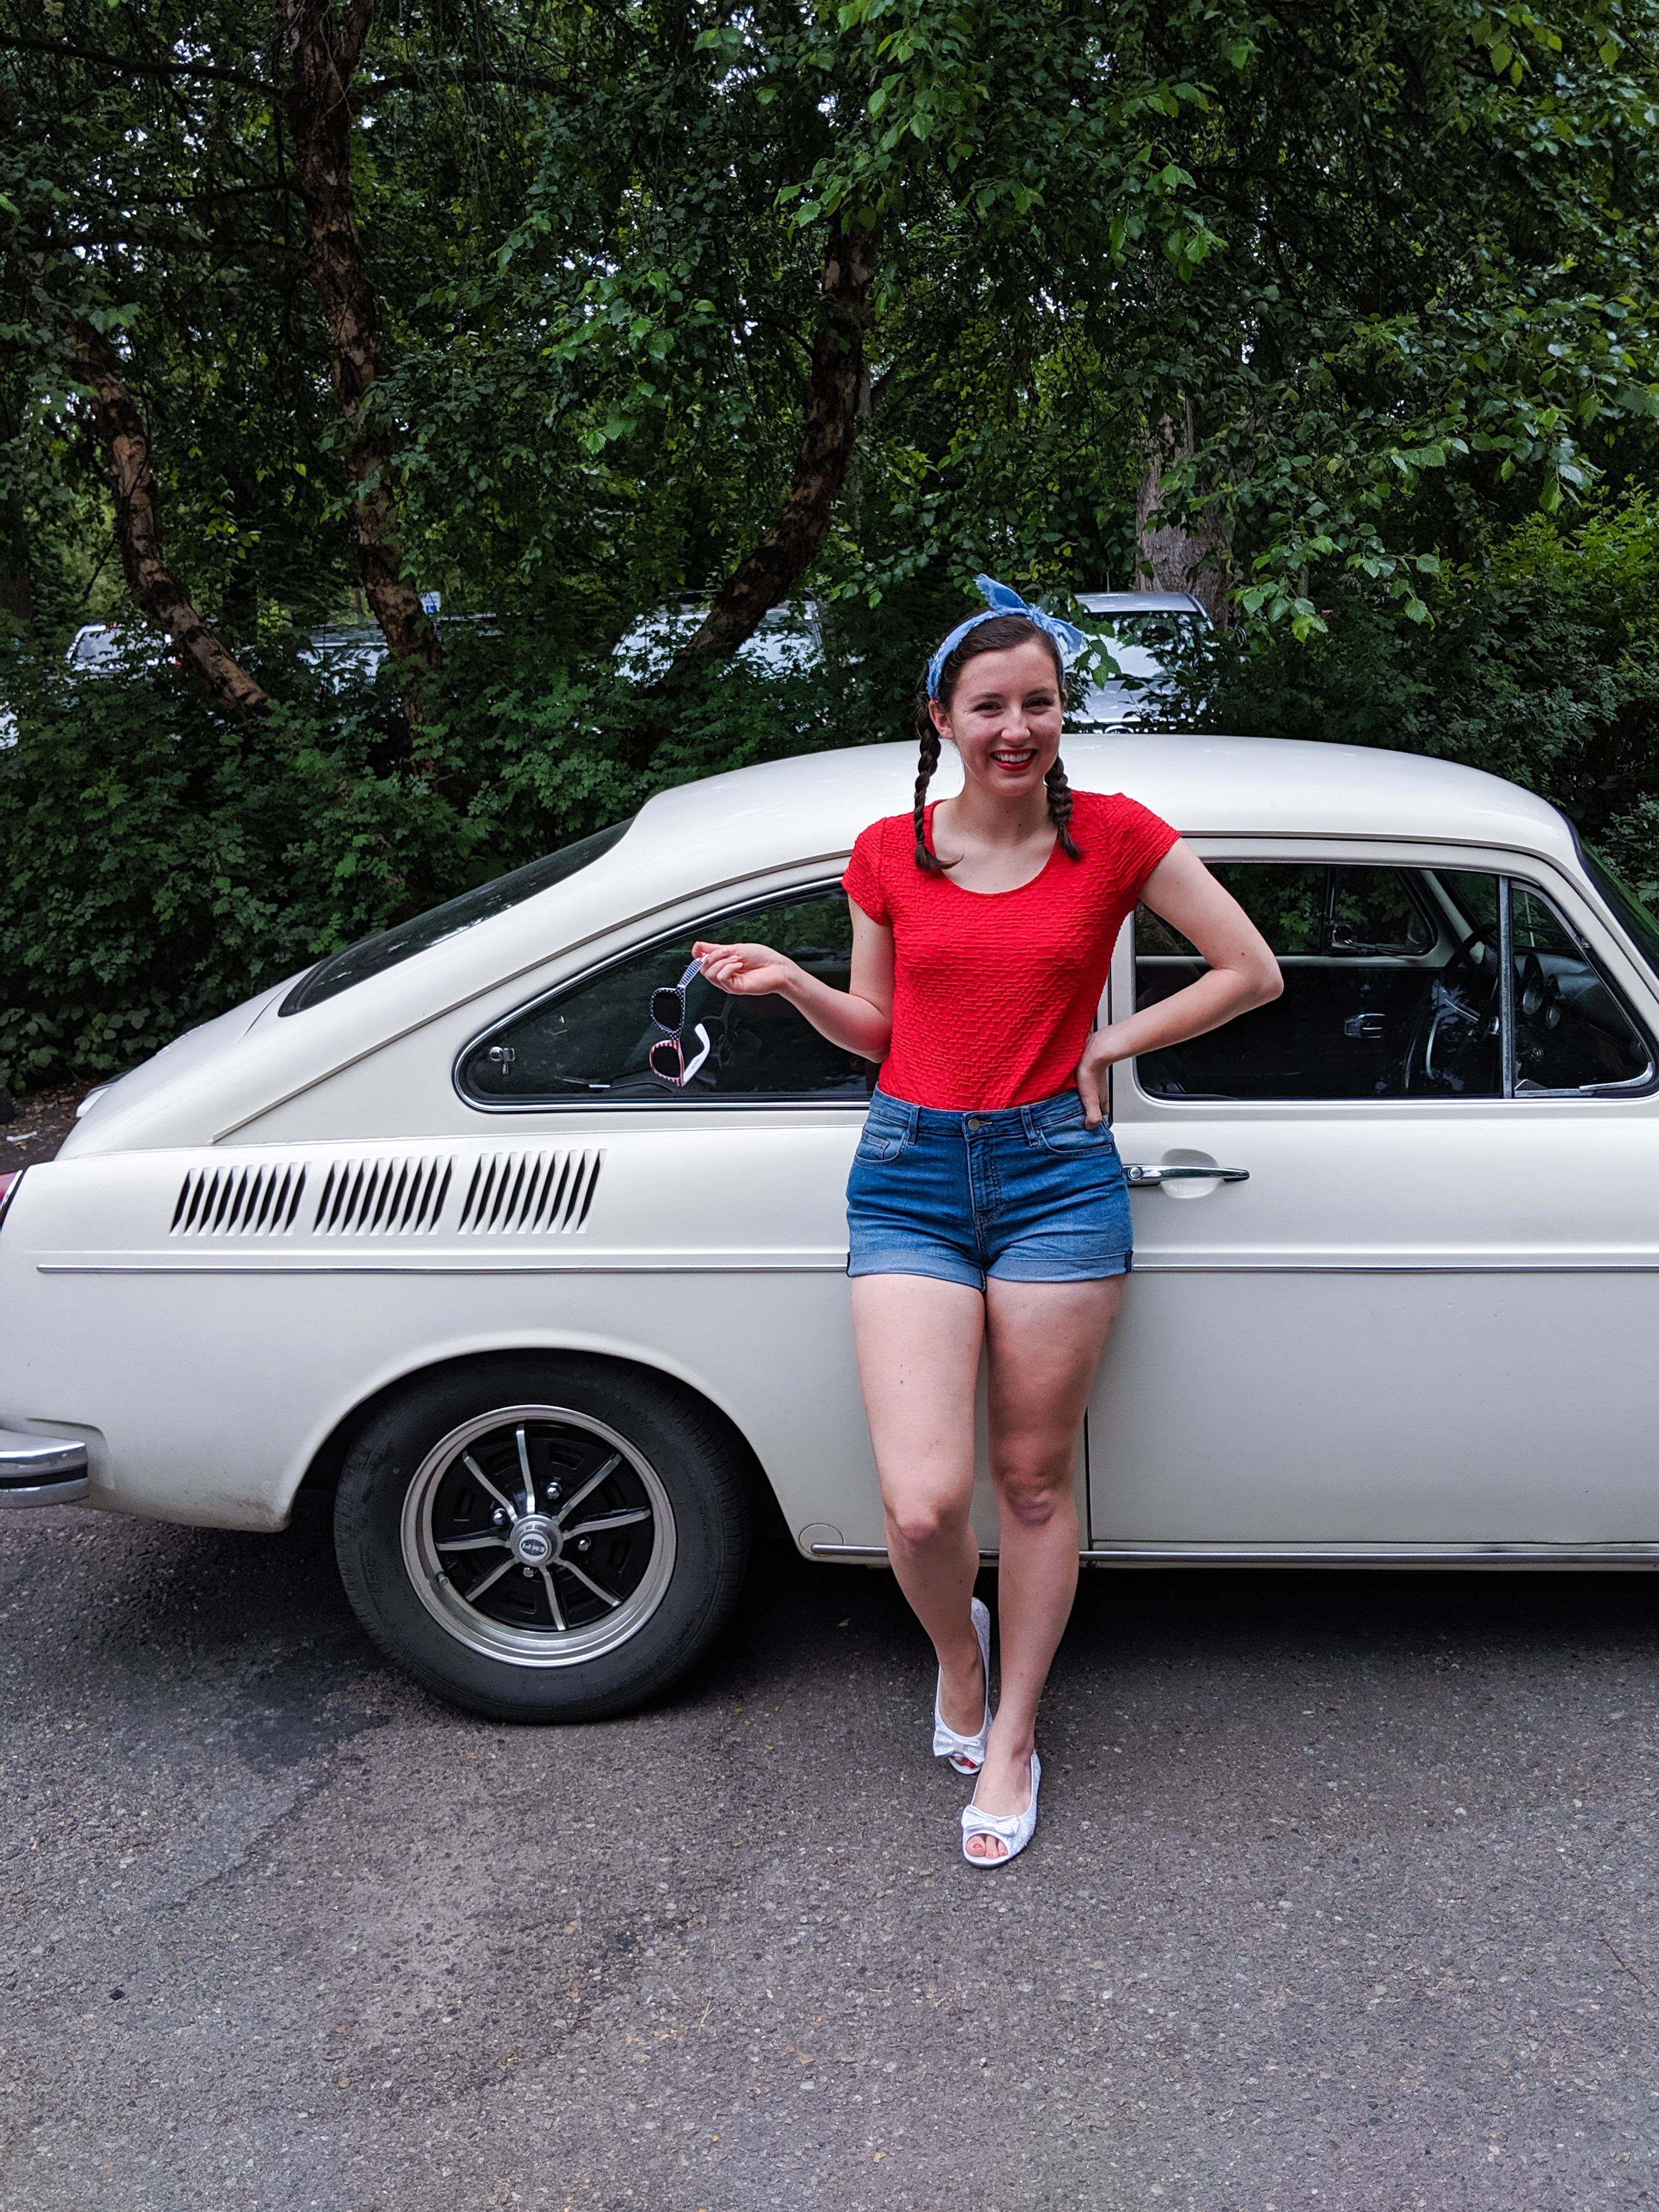 1970 Volkswagen Fastback, patriotic outfit, USA